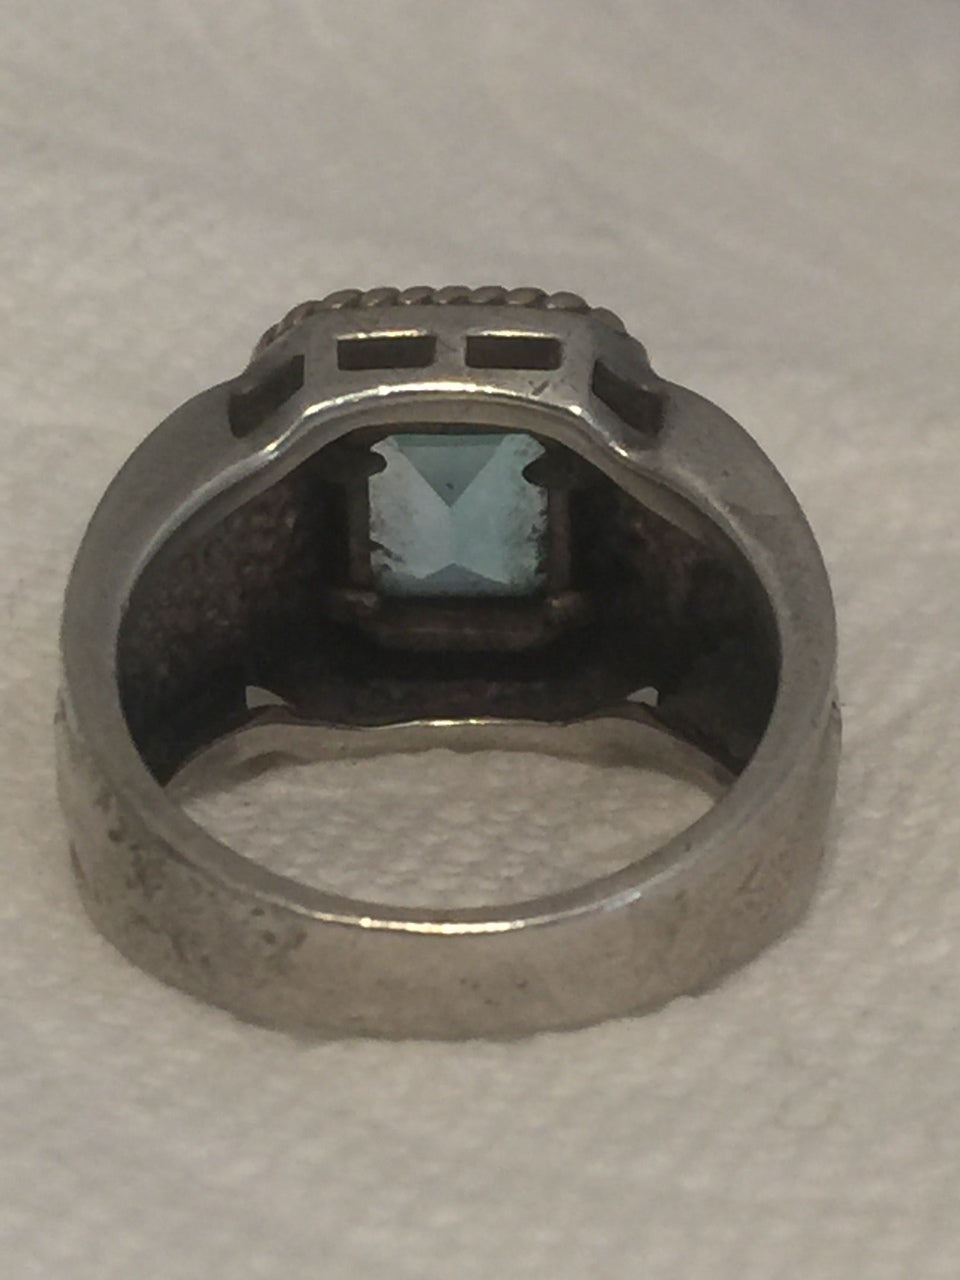 Vintage Sterling Silver Sky Blue Faceted Stone Ring   Size  6.50    8.5g